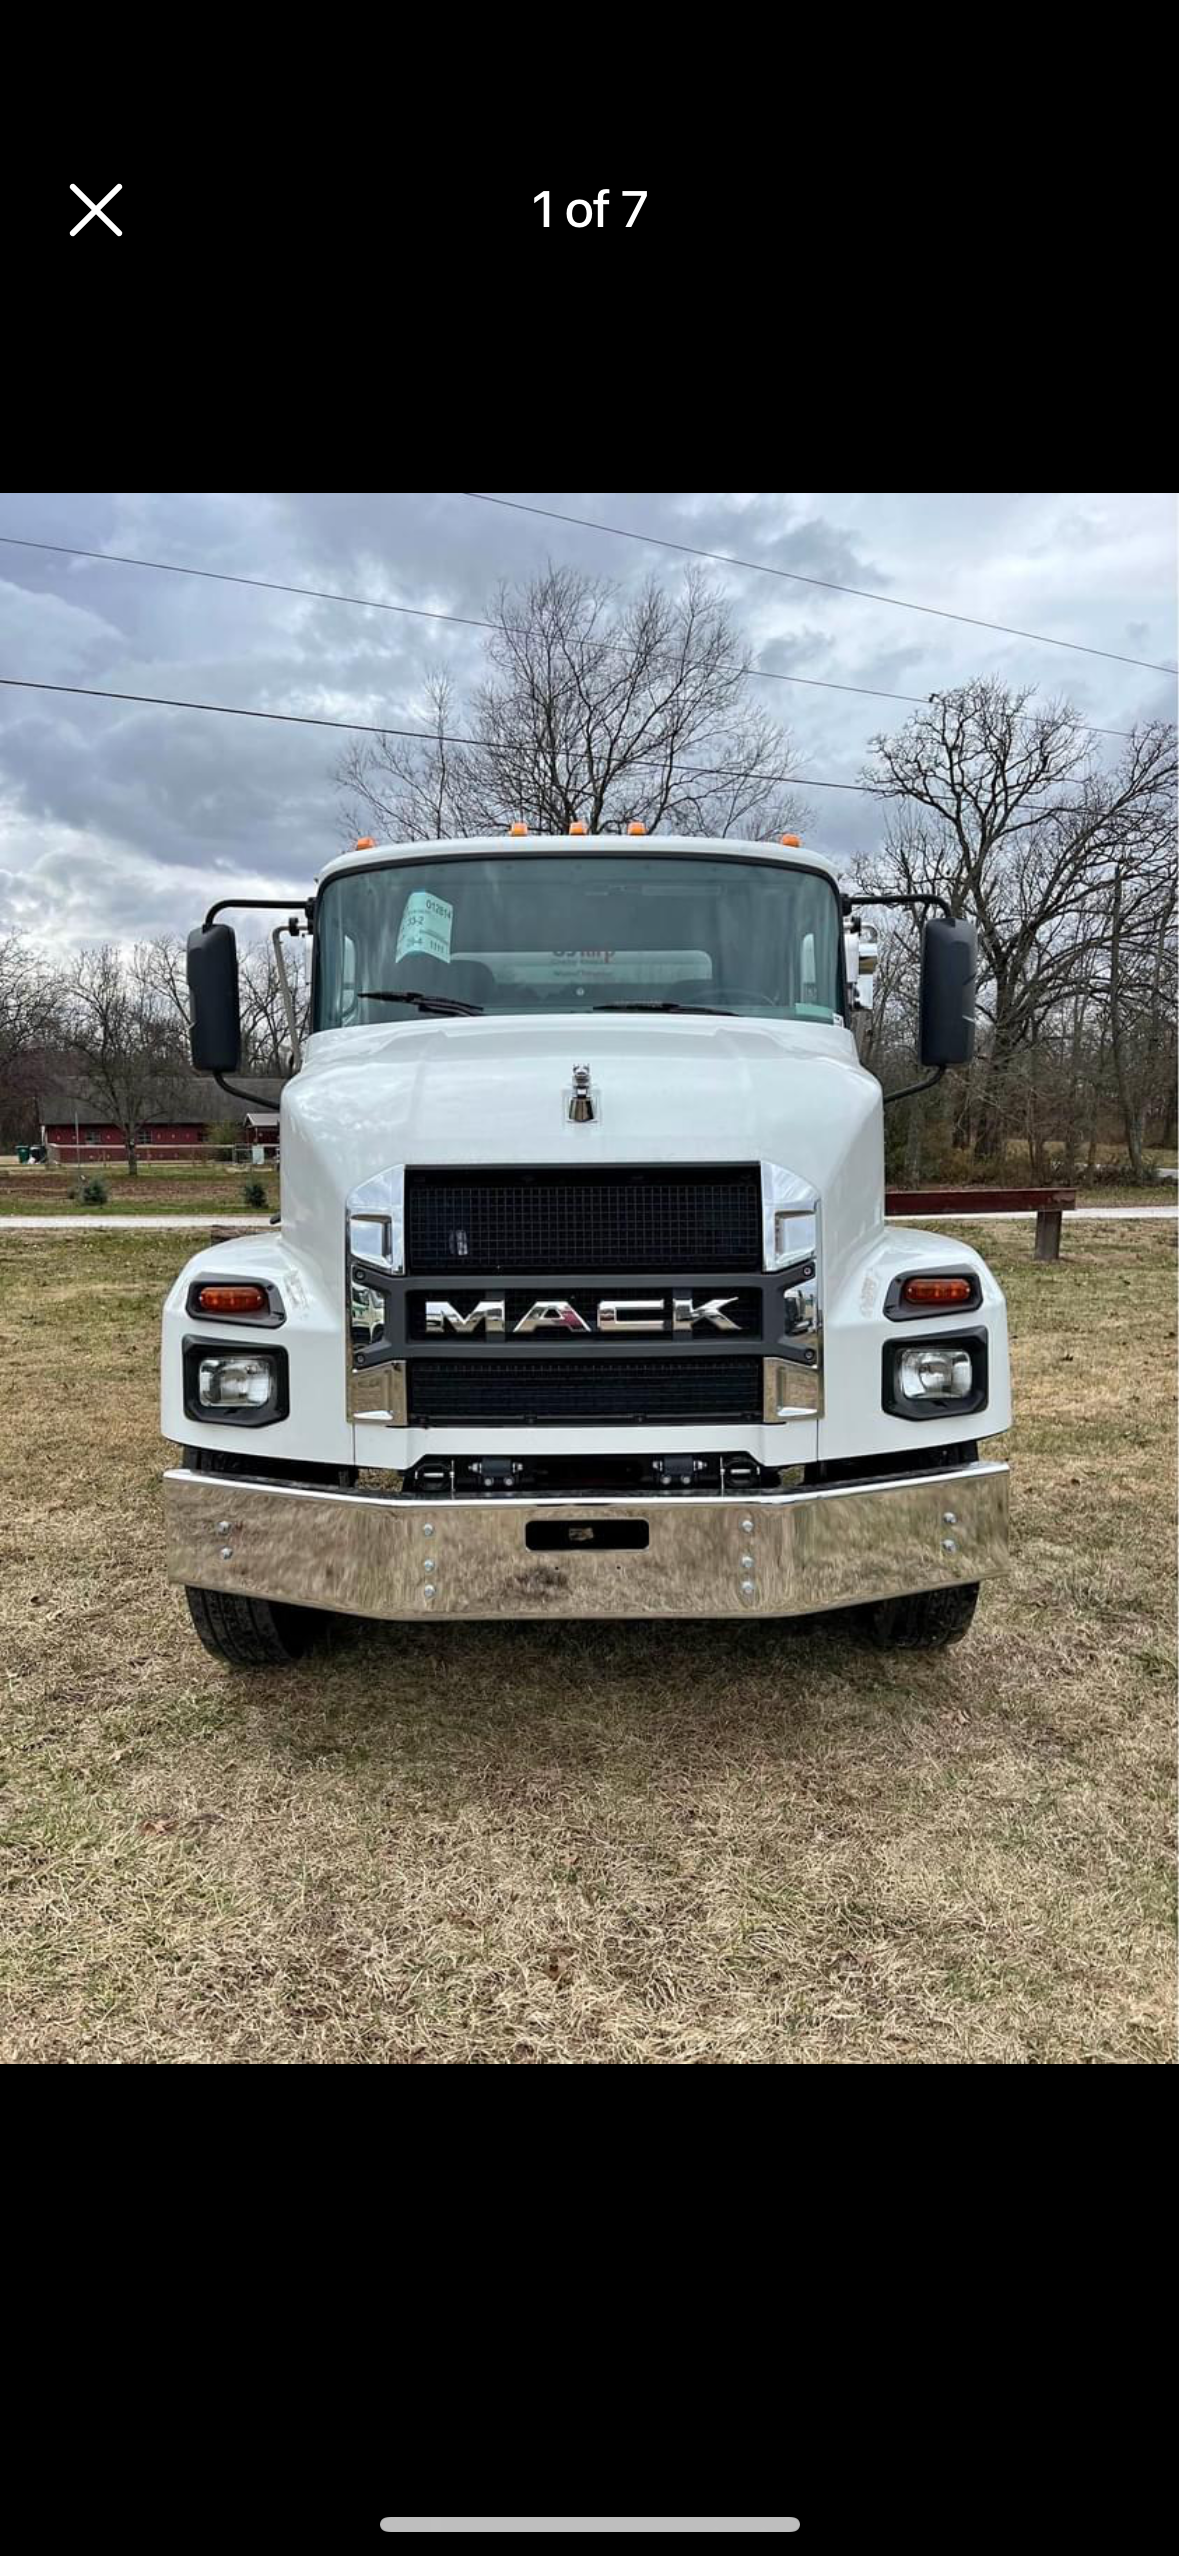 A white mack truck is parked in a grassy field.